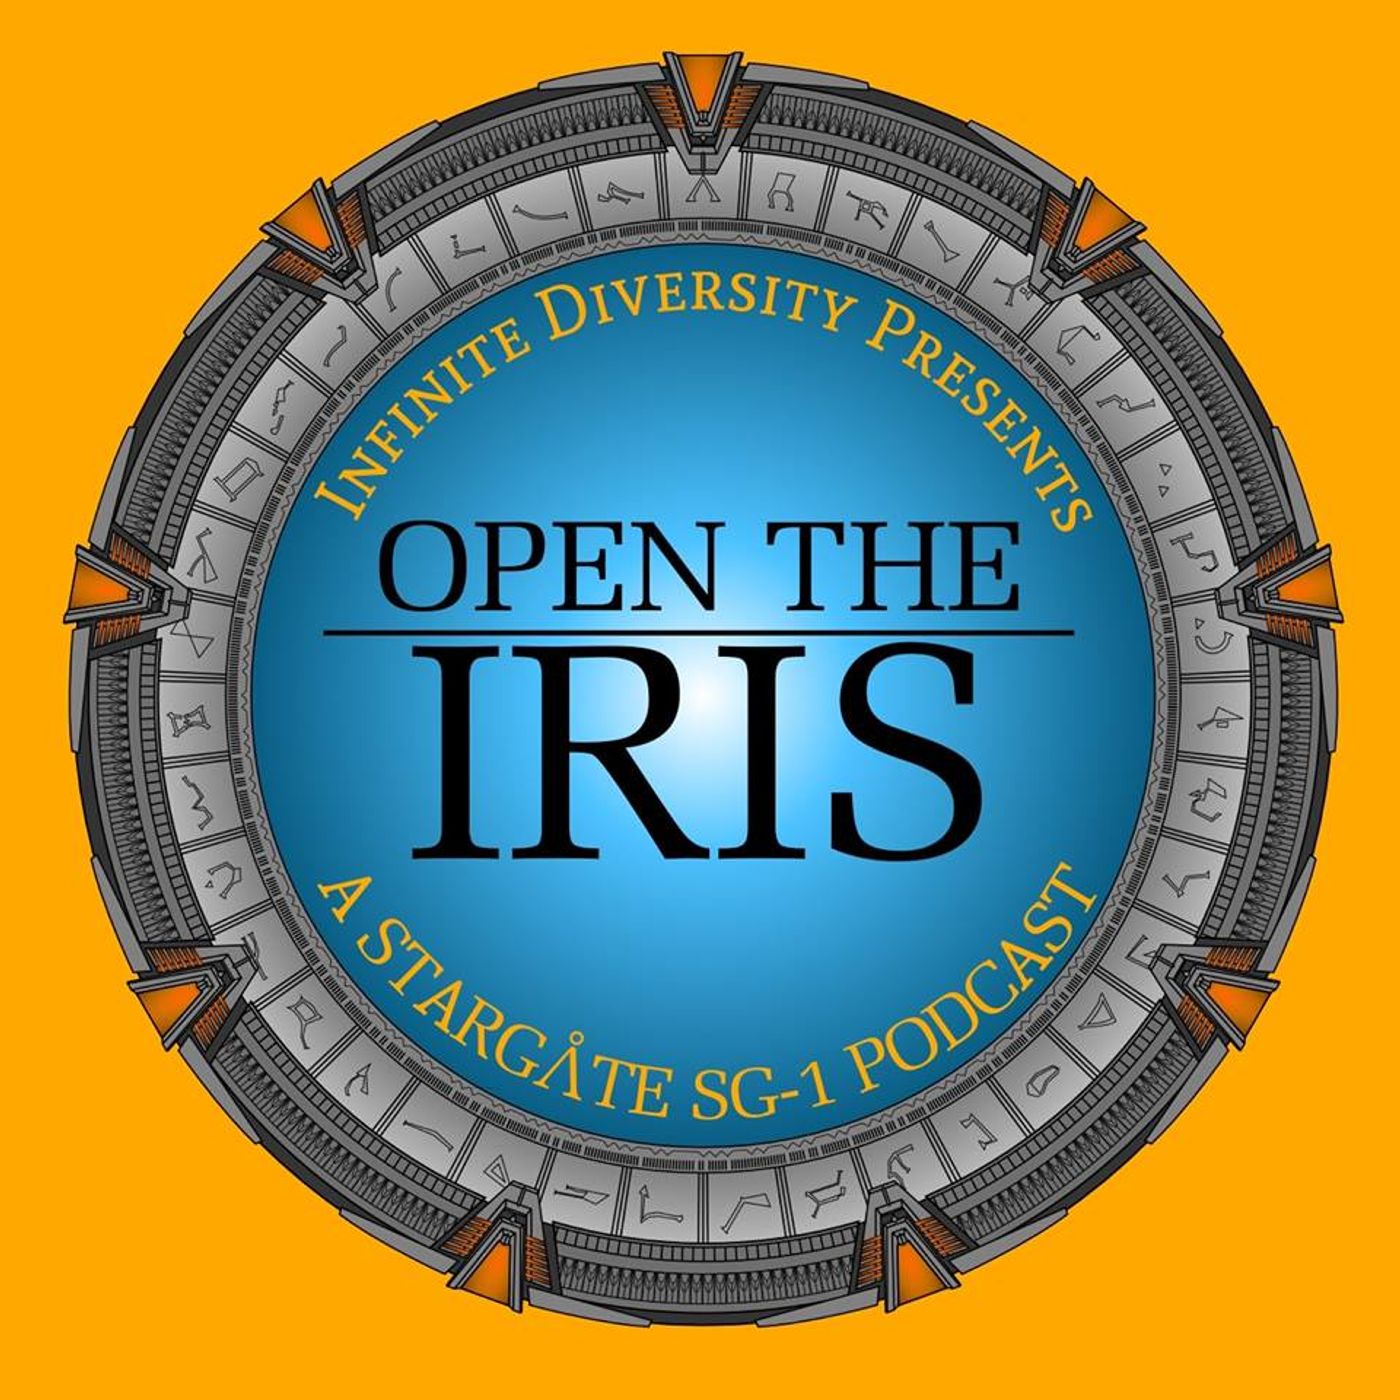 Open The Iris Episode 17: Scorched Earth